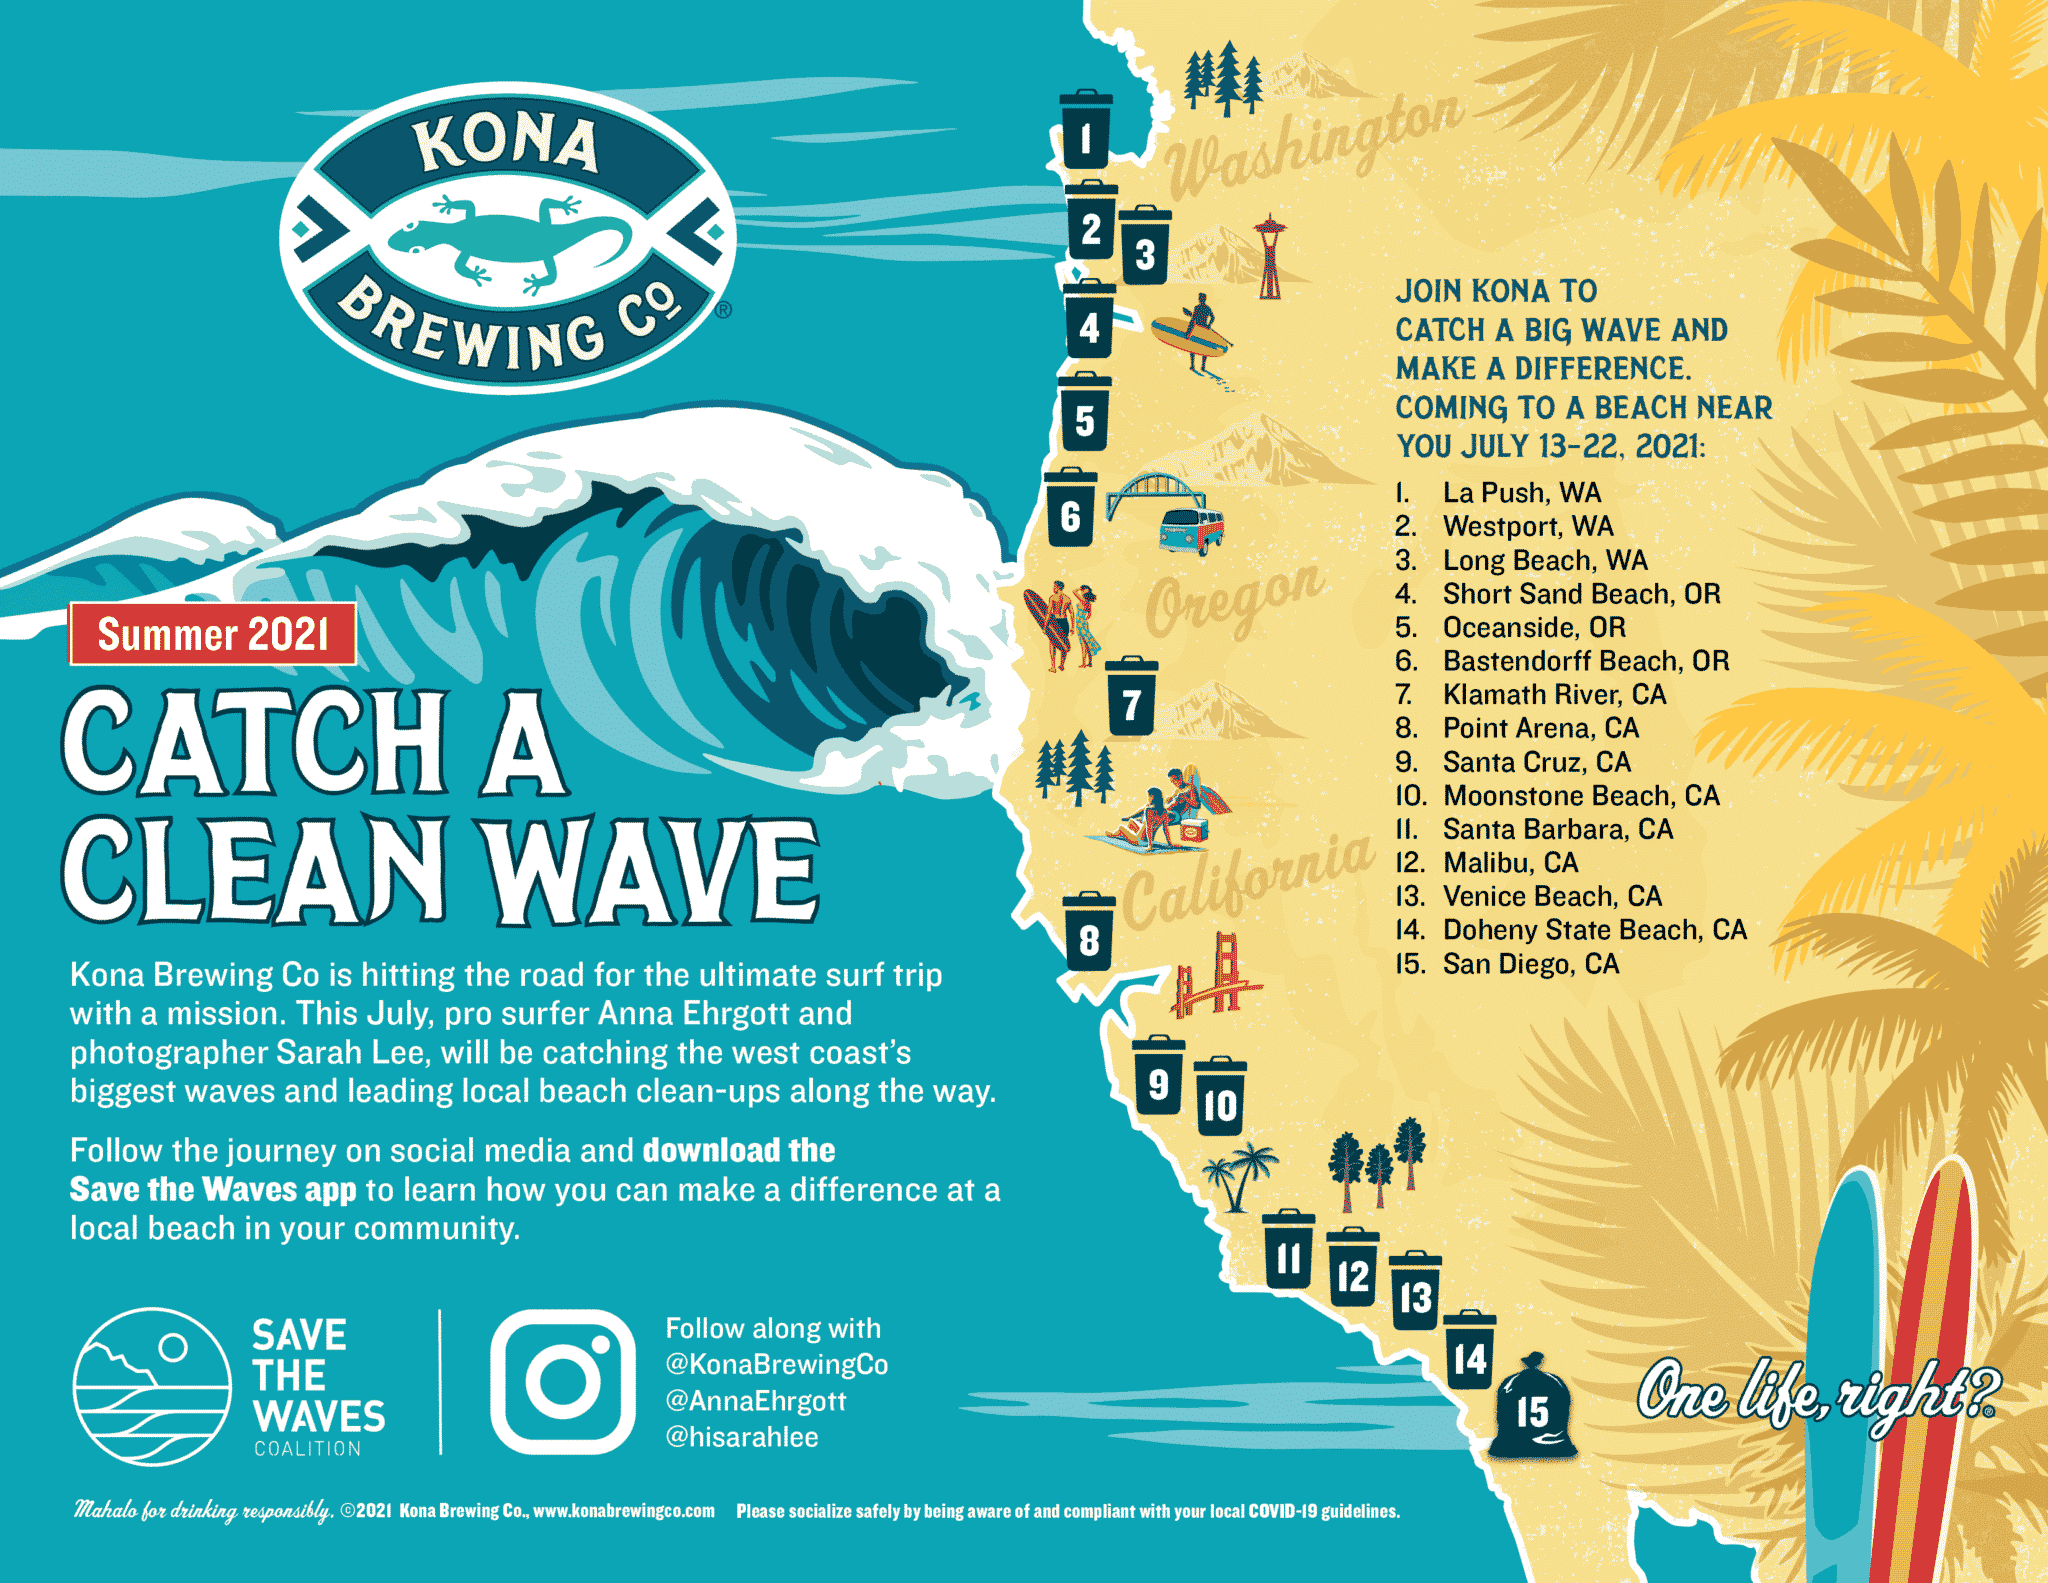 A map shows the 15 stops on the Catch A Clean Wave journey.